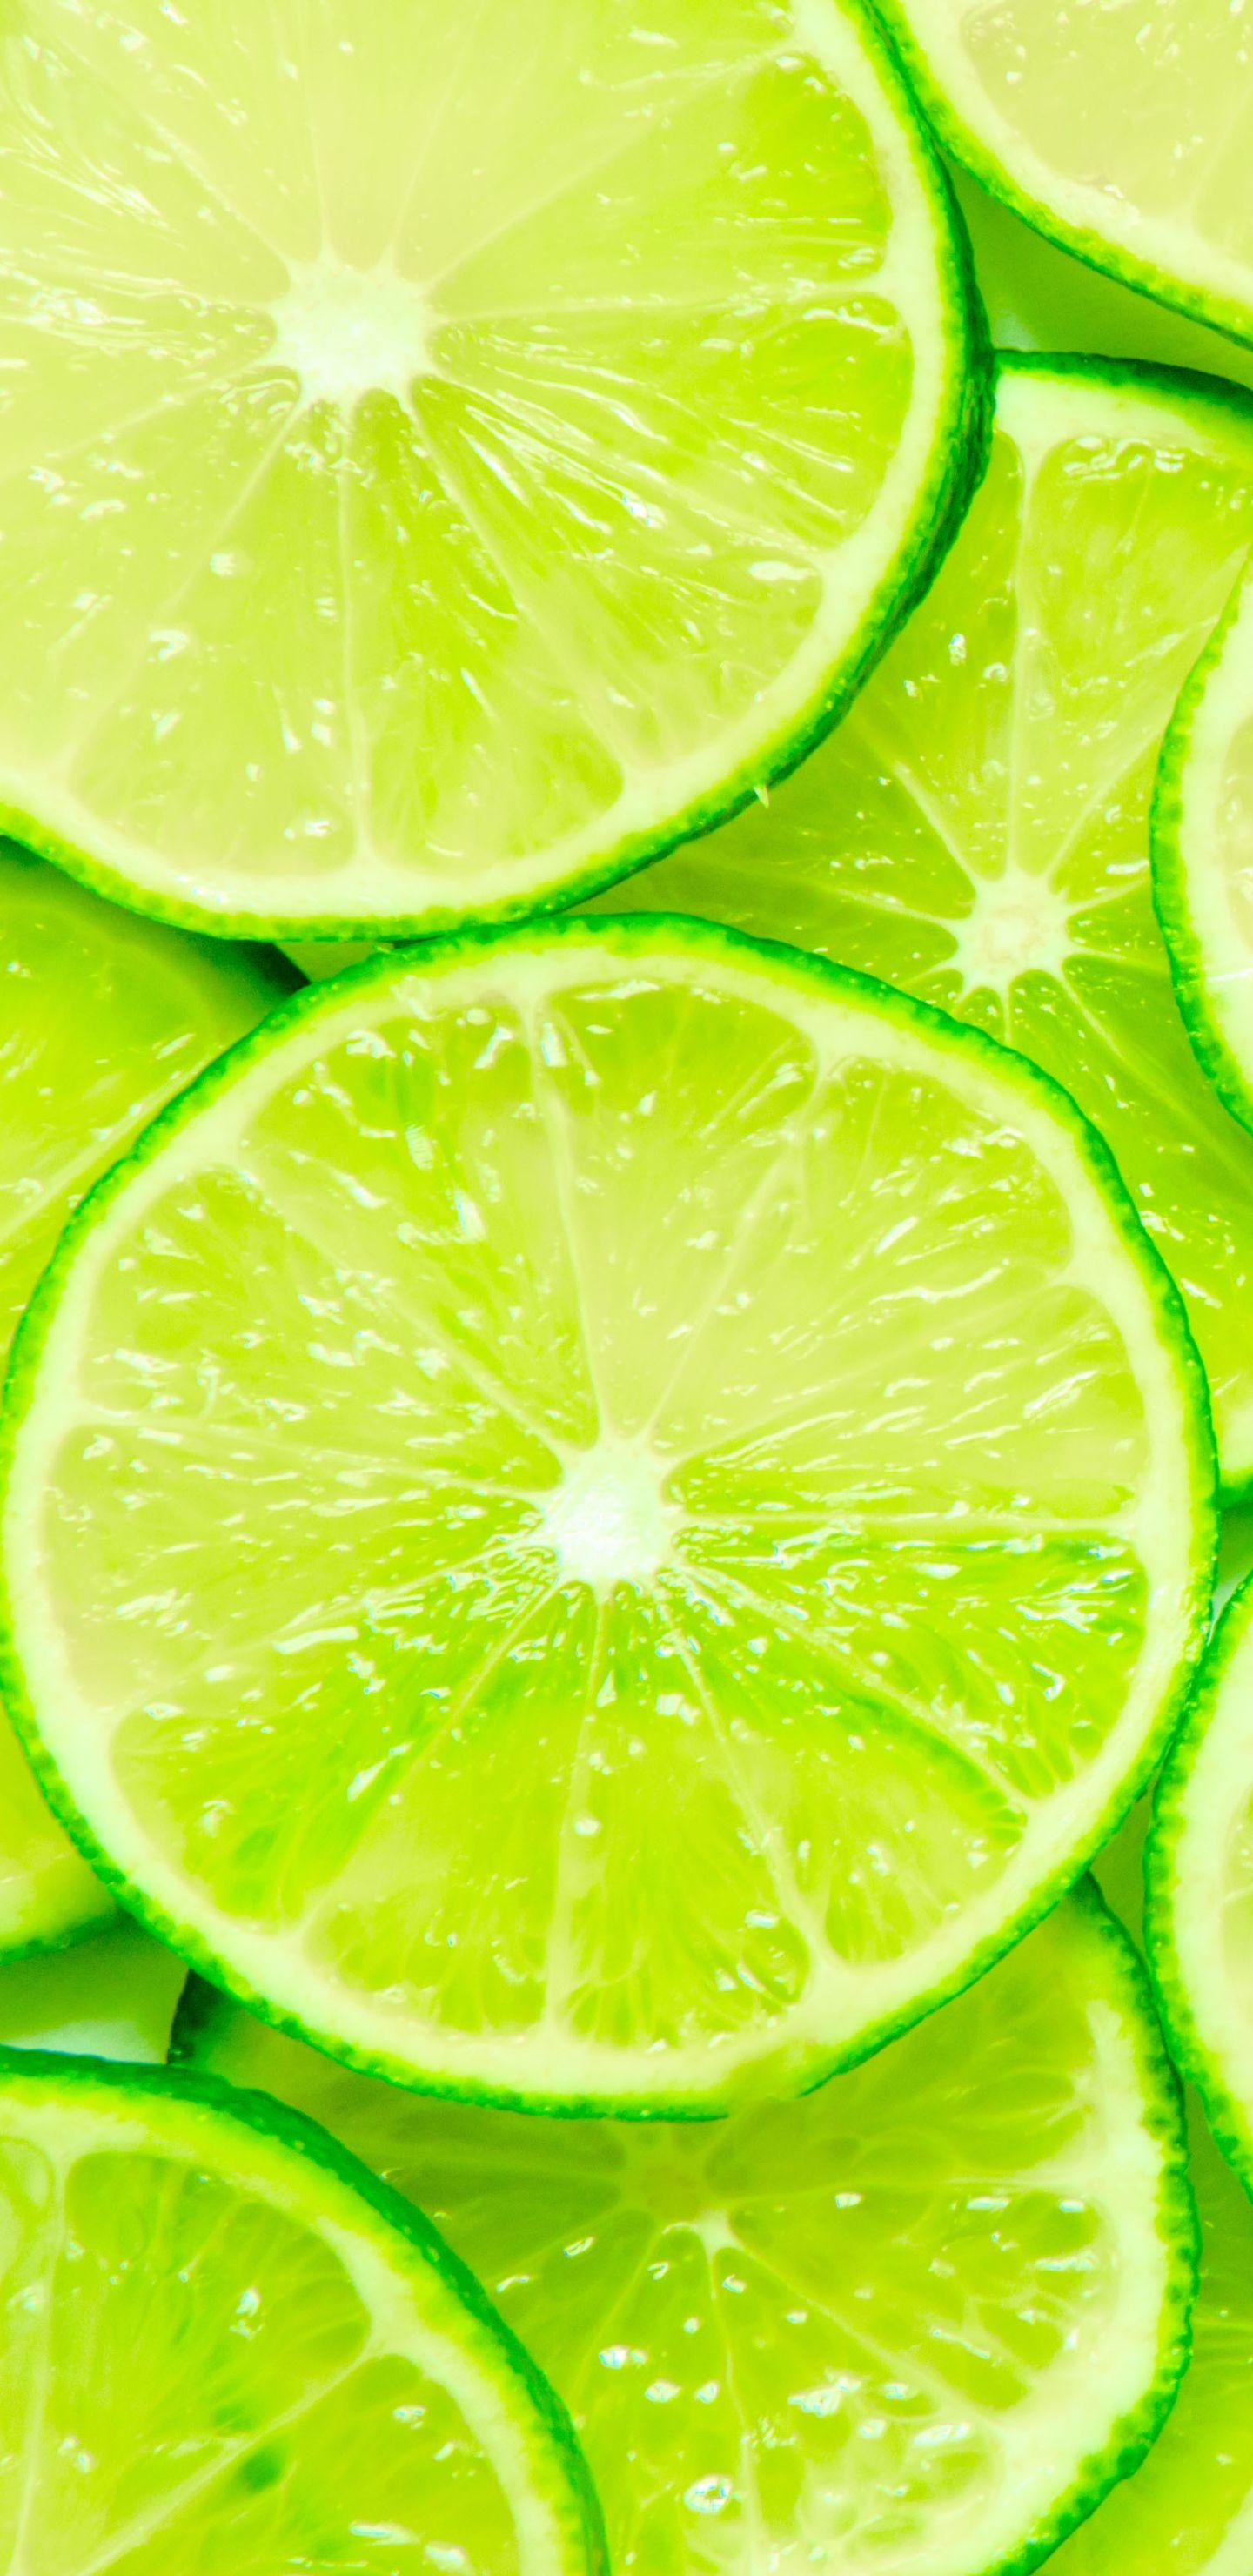 Lime Slices And Leaves Seamless Pattern Bright Green Citrus Vector Print  Wallpaper Royalty Free SVG Cliparts Vectors And Stock Illustration  Image 101935185